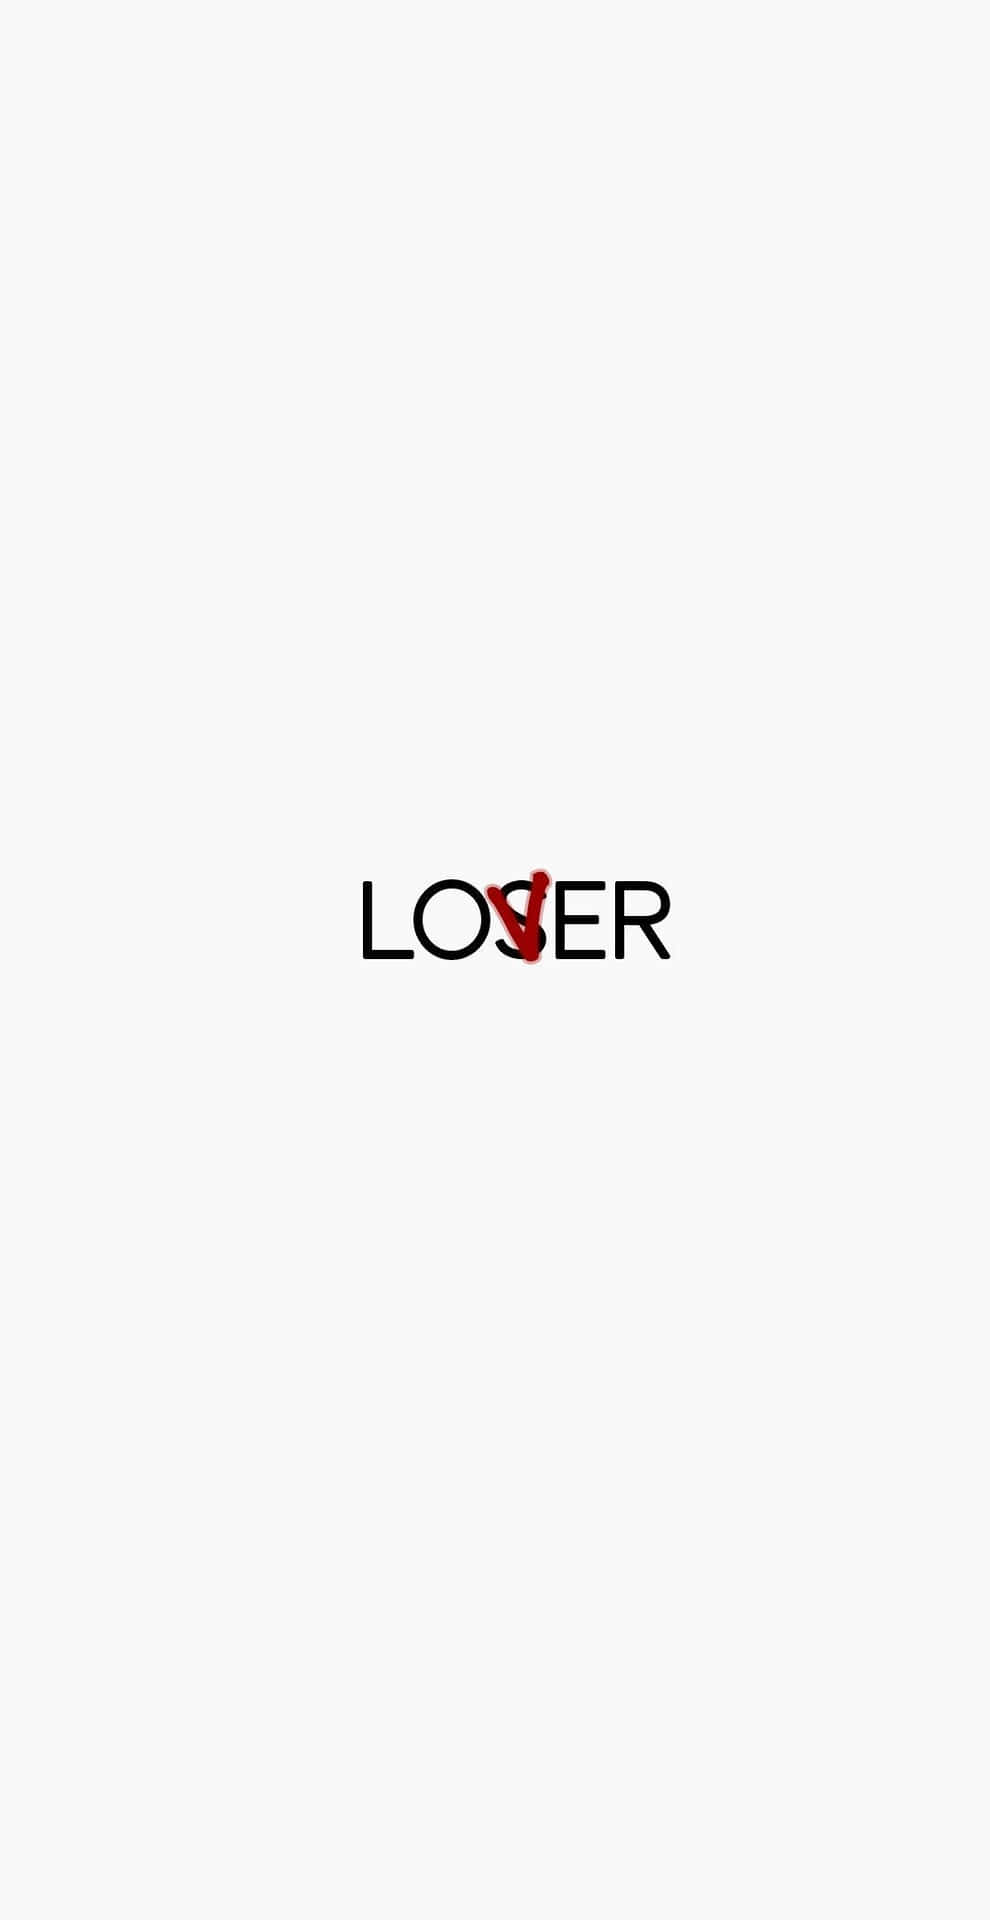 A Logo With The Word Loser On It Wallpaper